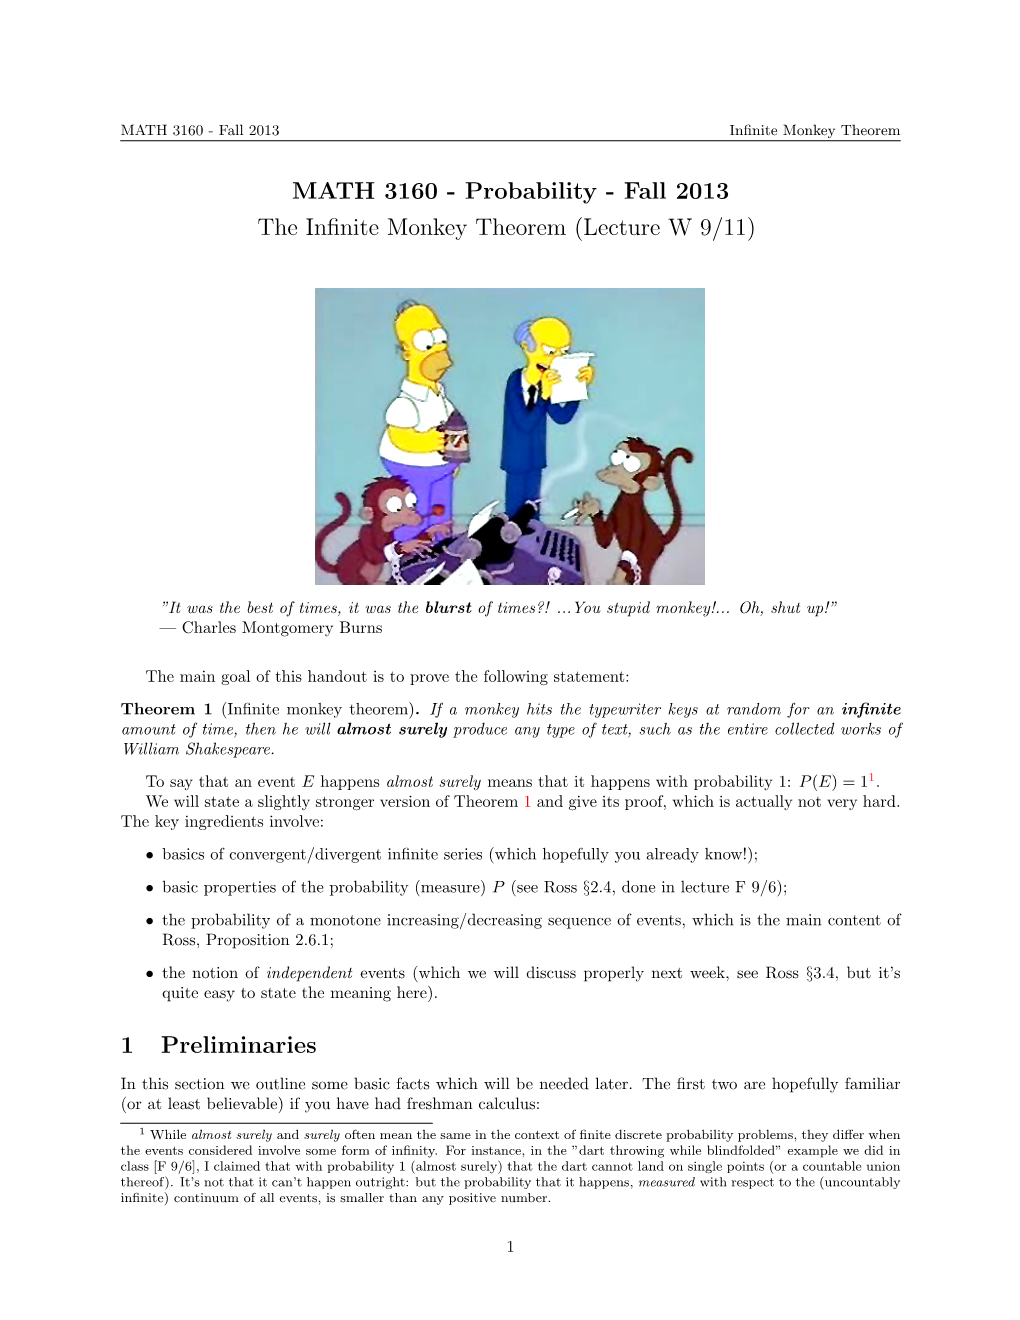 Probability - Fall 2013 the Inﬁnite Monkey Theorem (Lecture W 9/11)